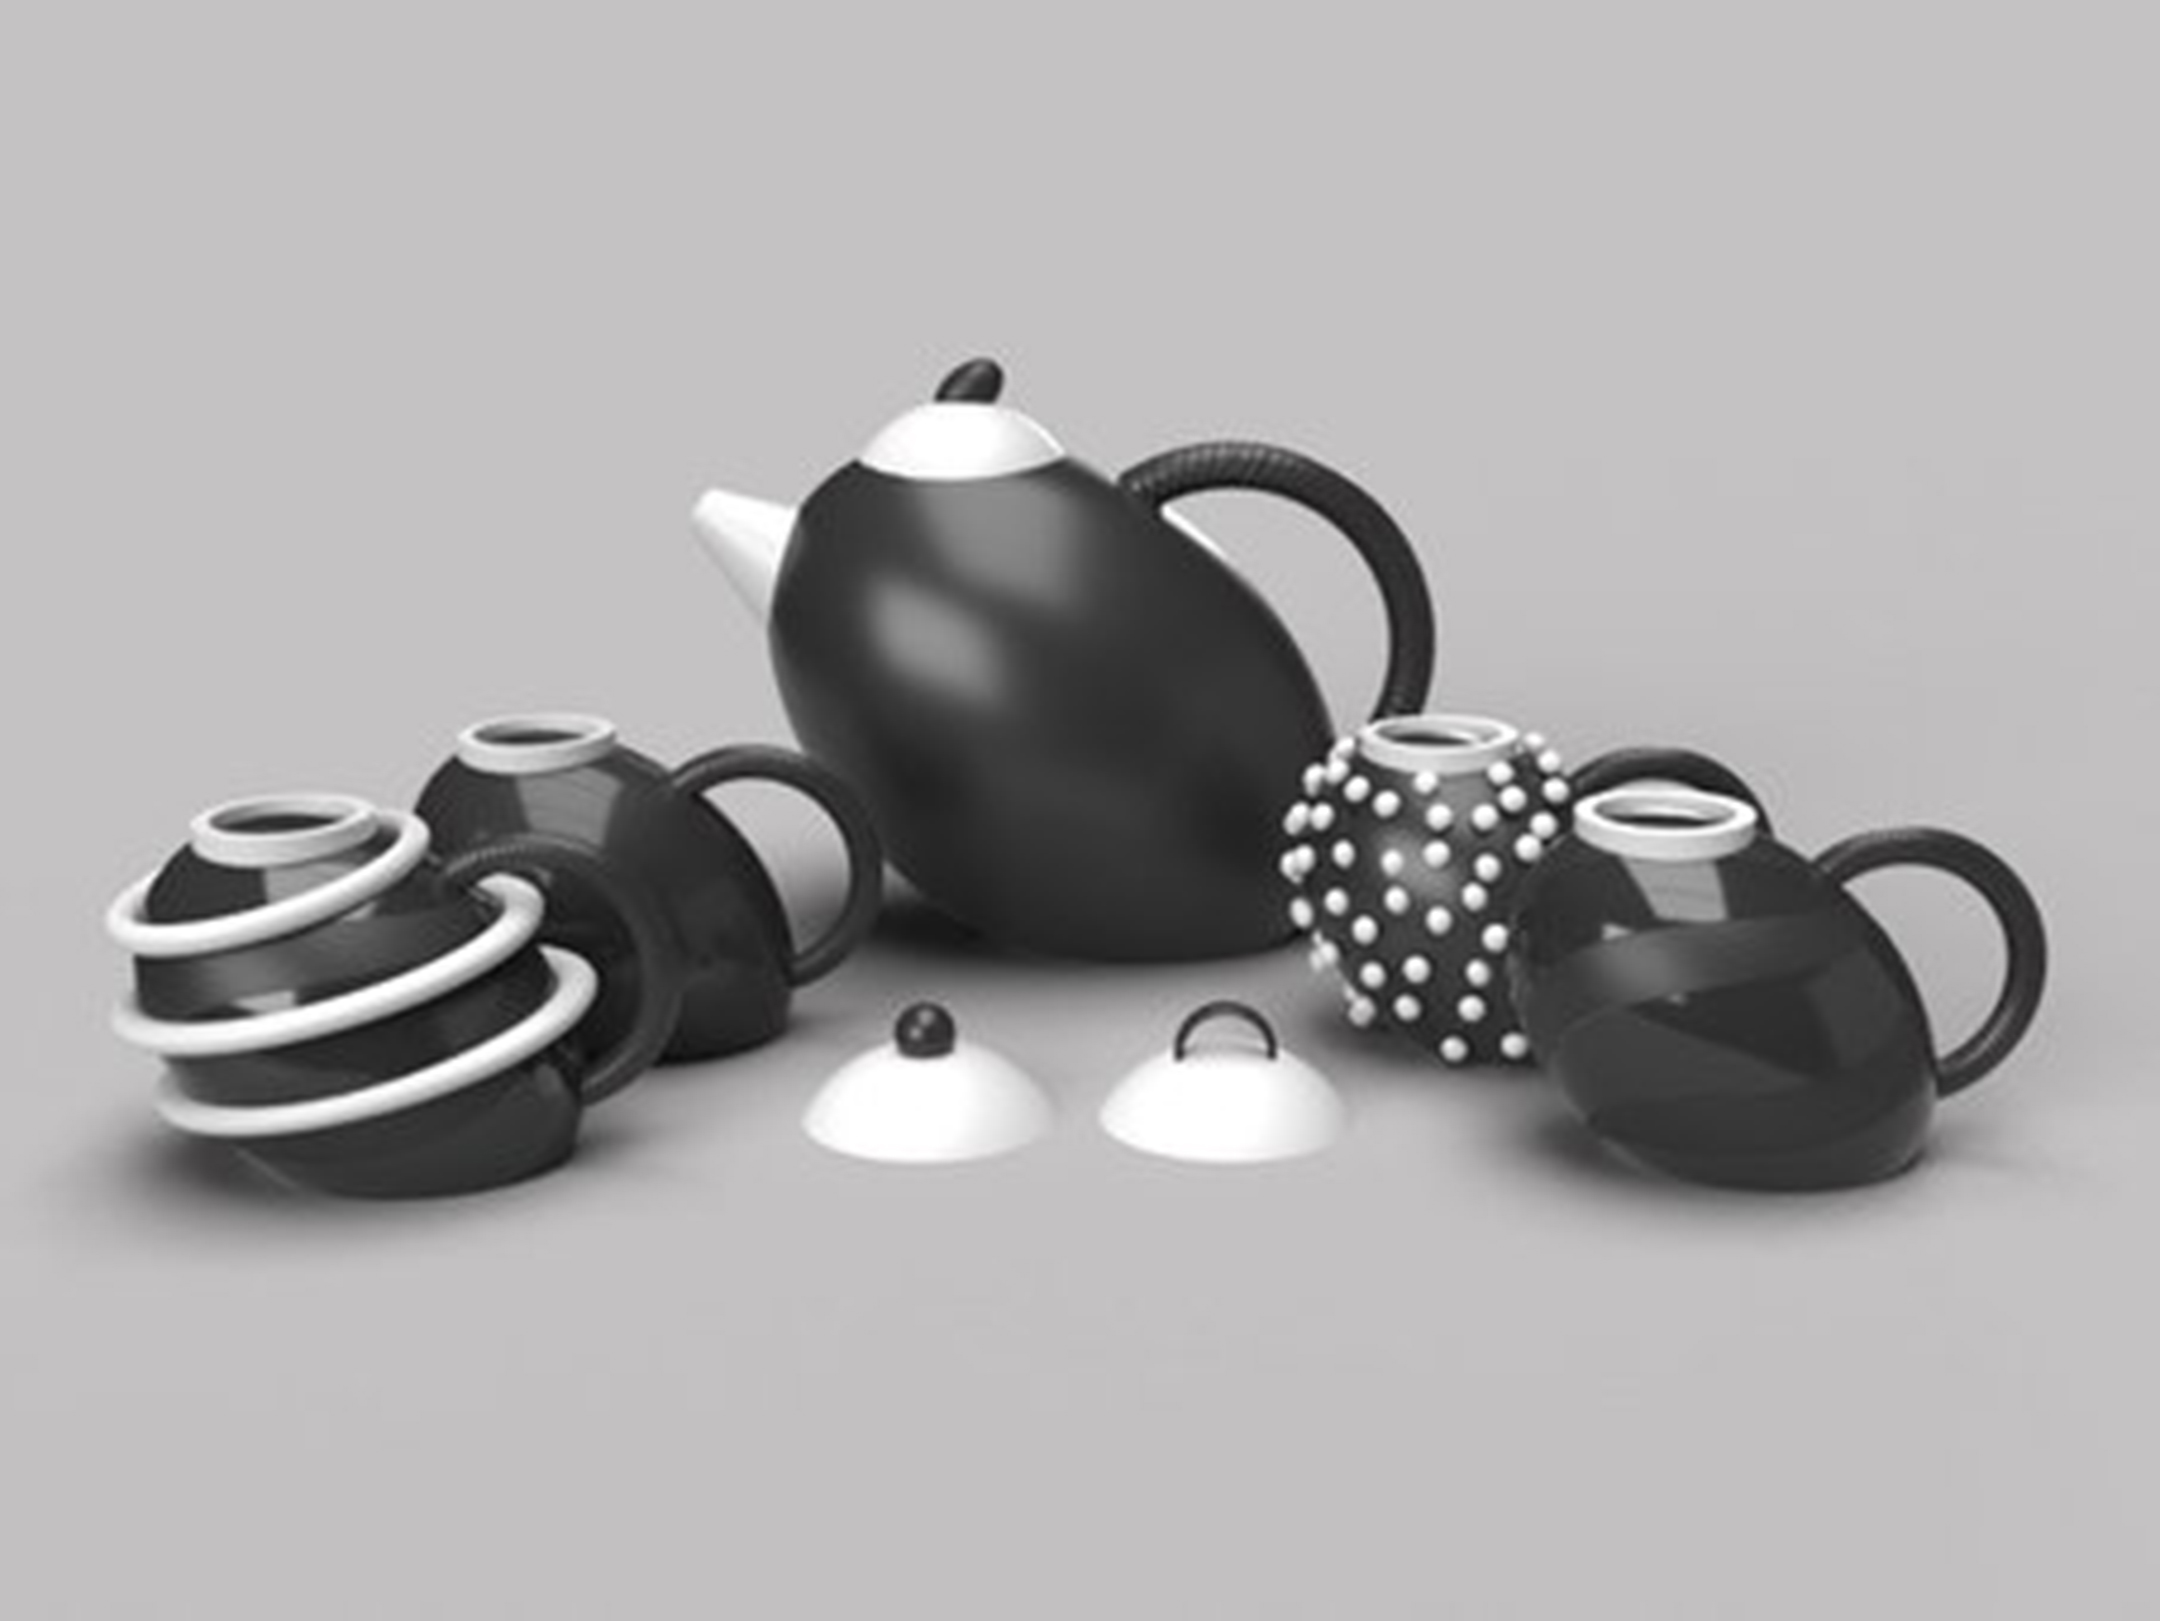 Photo of a five-piece tea set in black, white, and gray